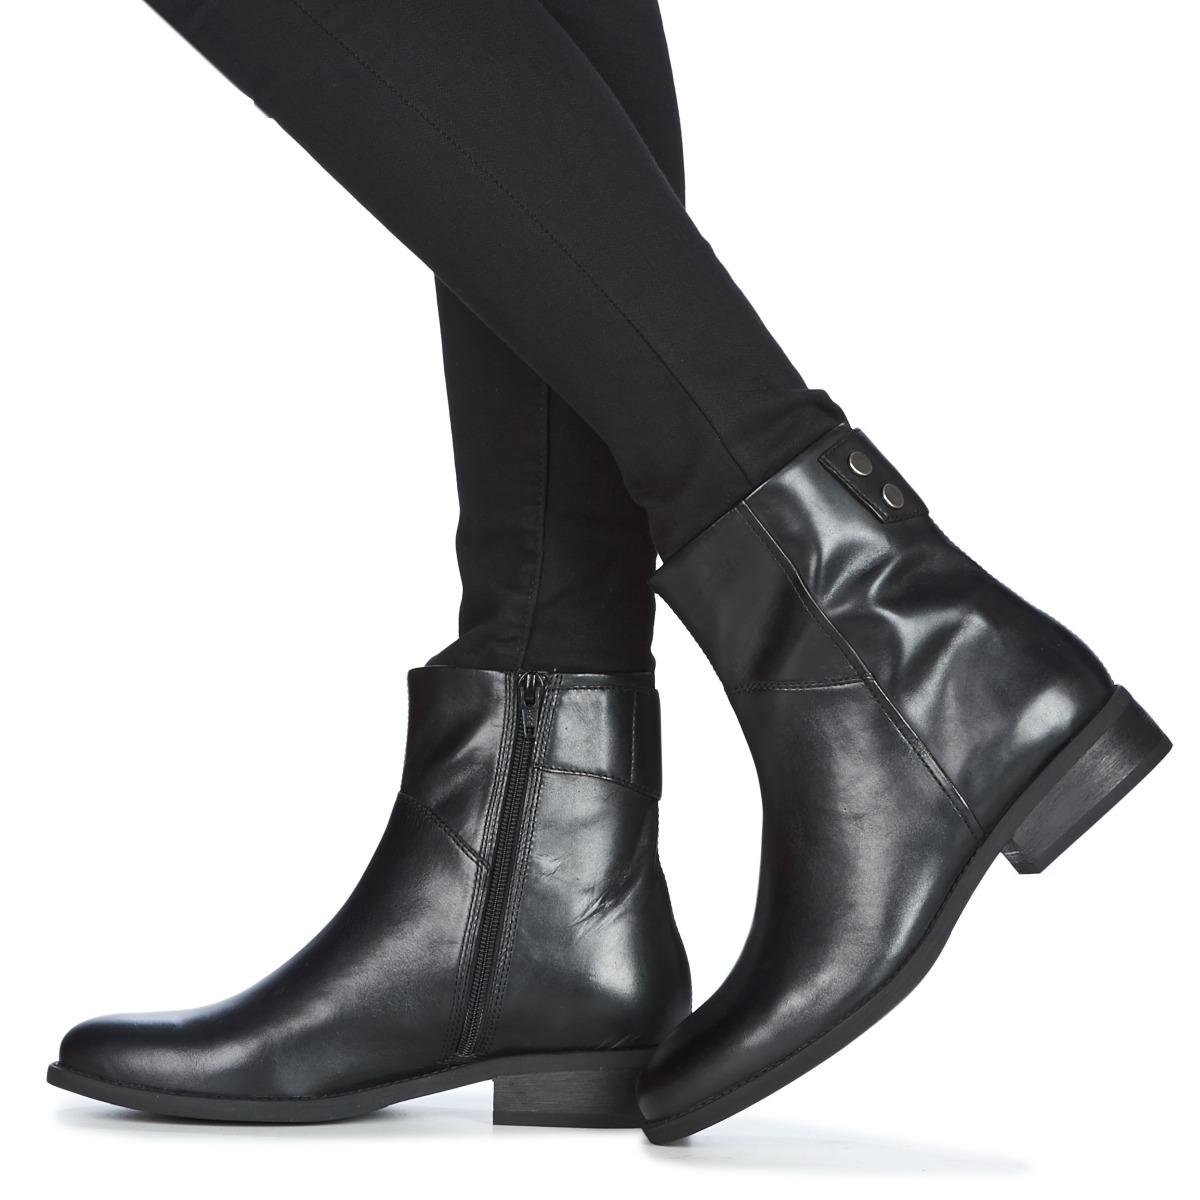 Vagabond Cary Mid Boots in Black - Save 16% - Lyst